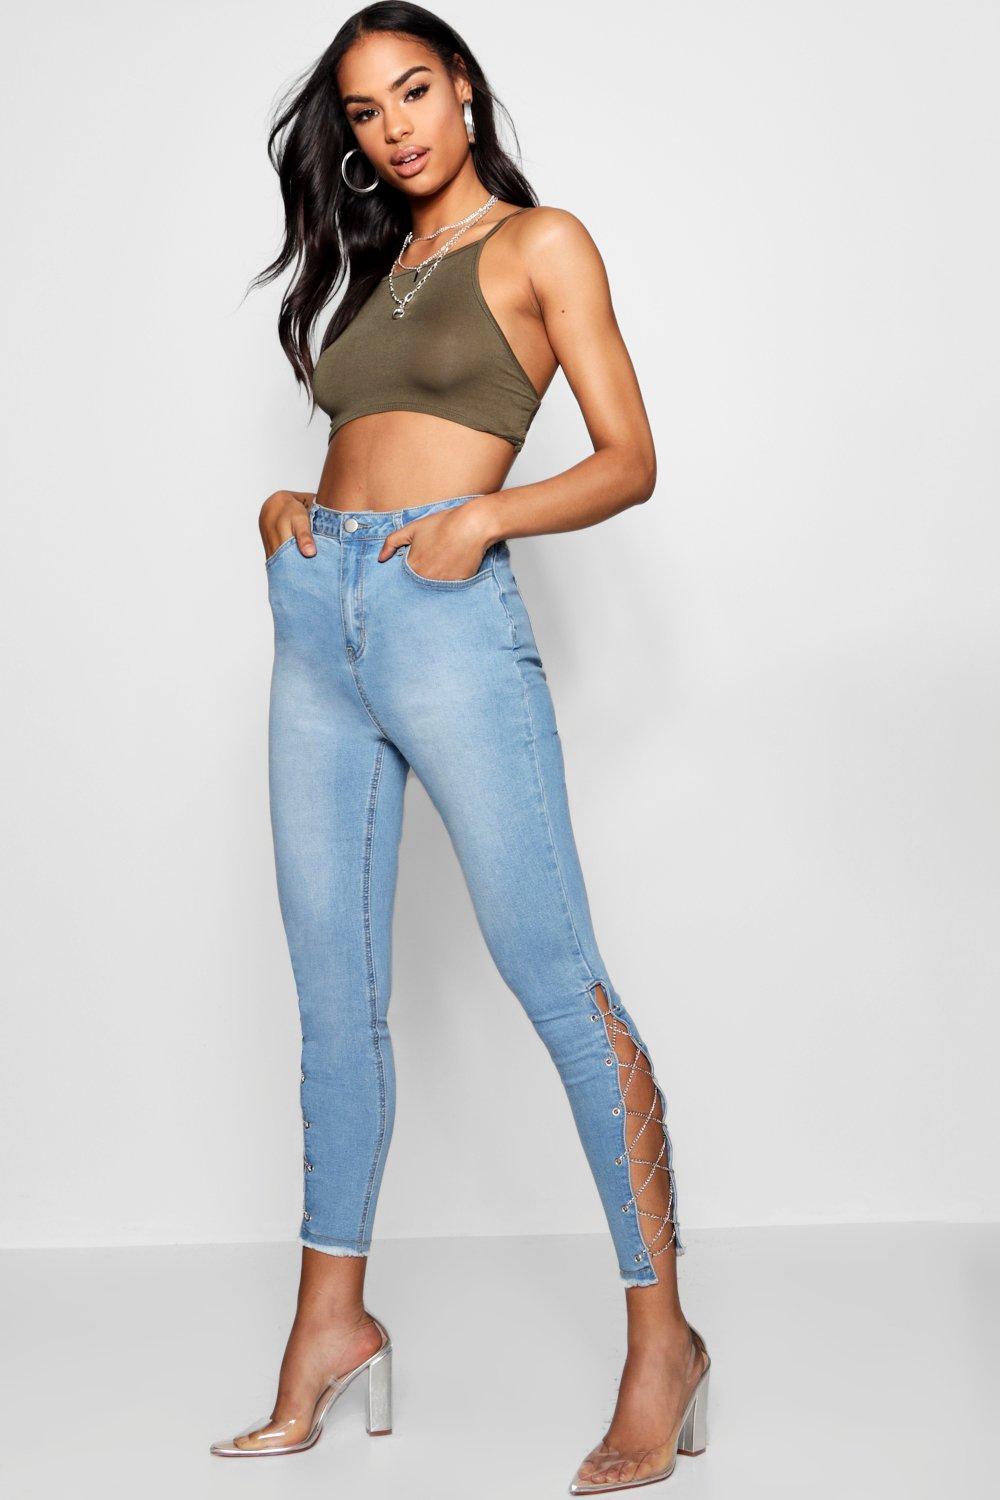 jeans with chains for rips